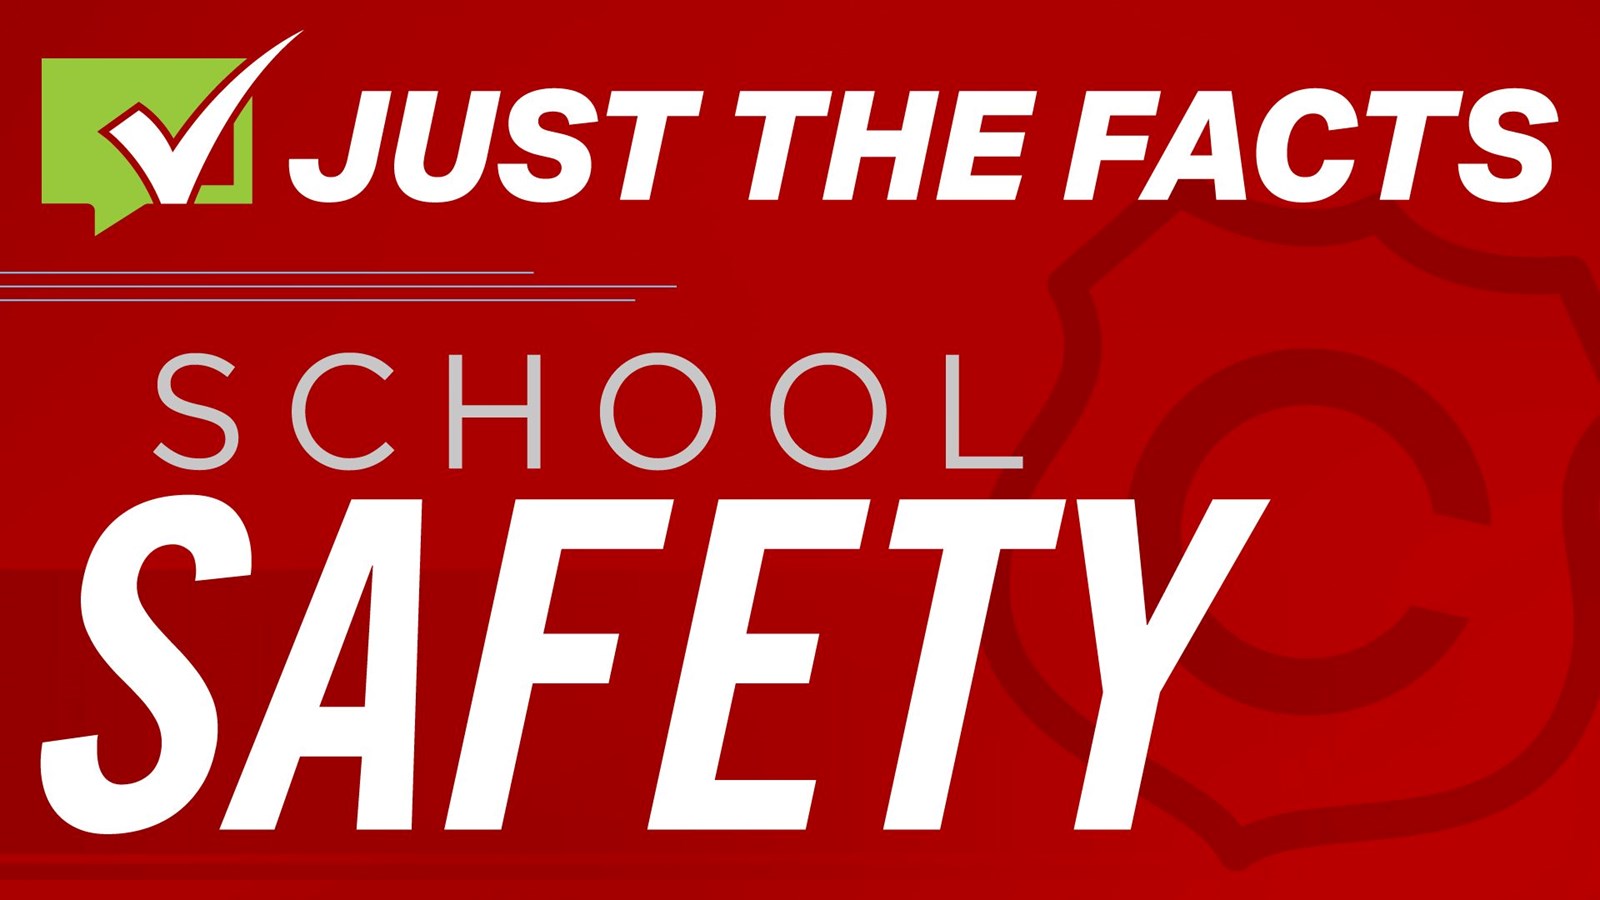 Just the Facts School Safety